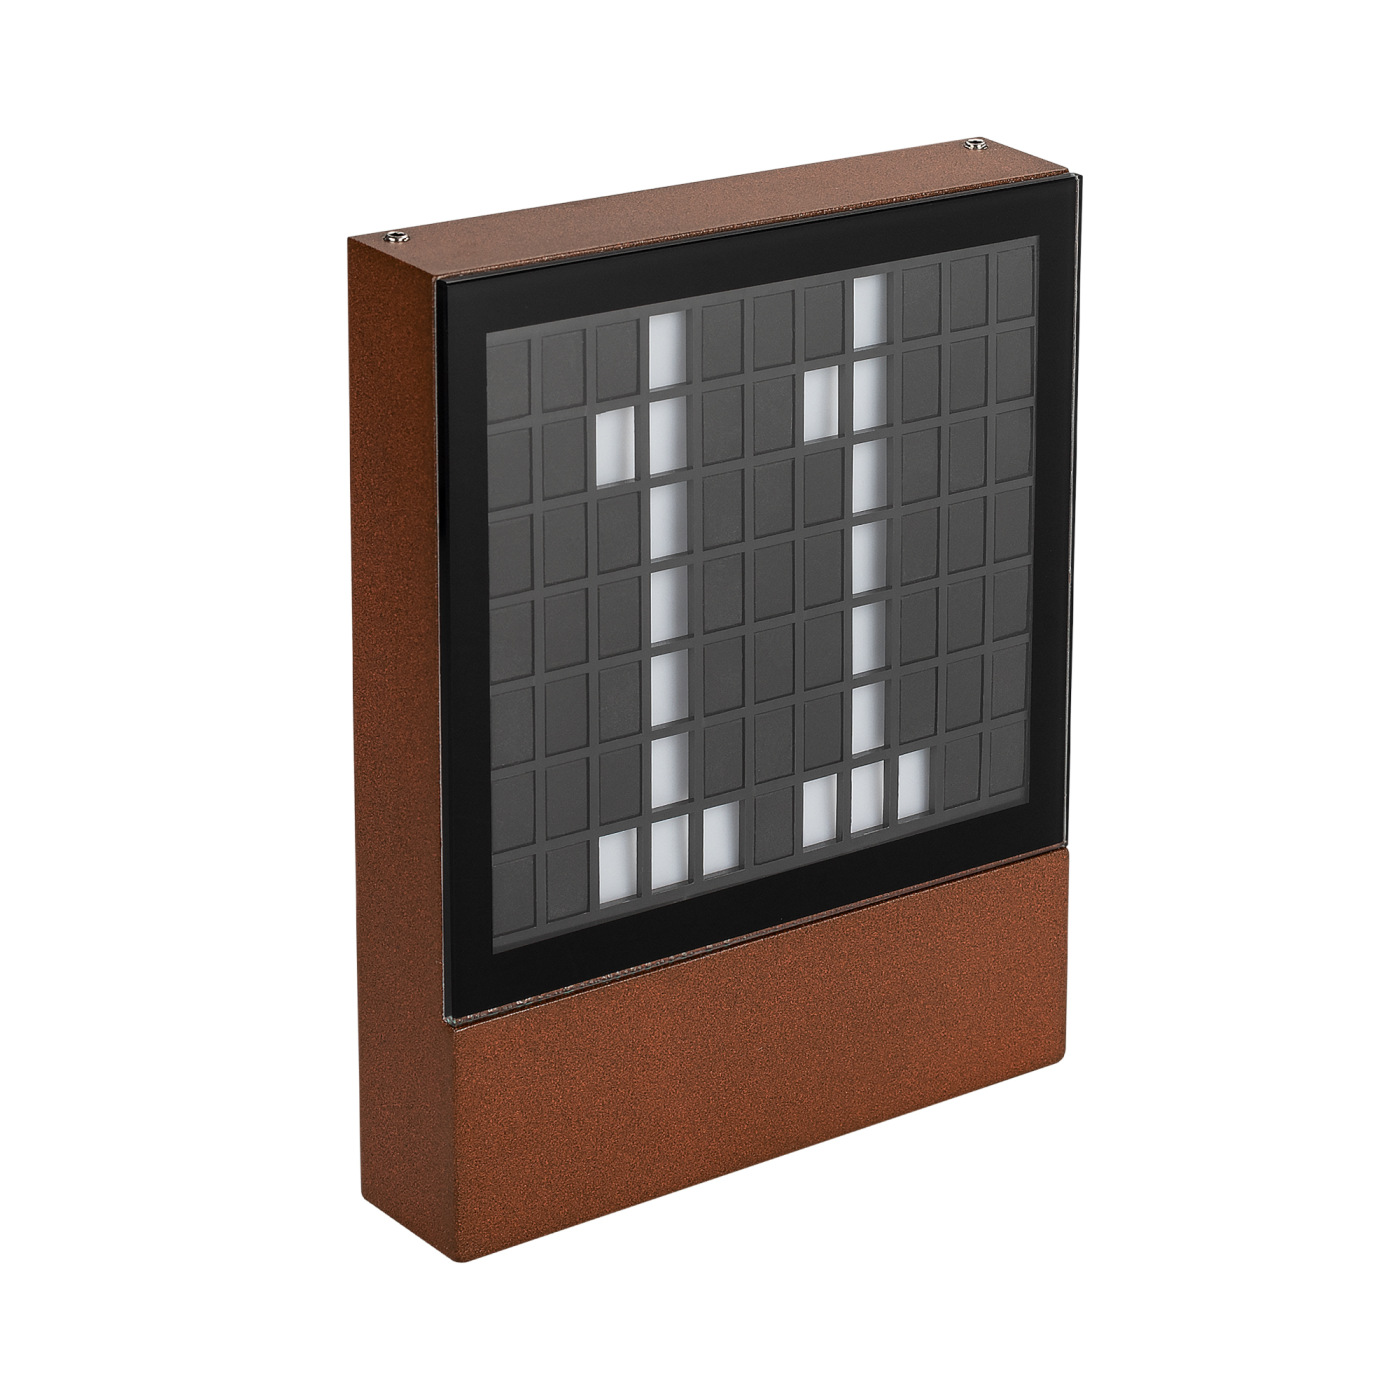 Светильник LGD-SIGN-WALL-S150x200-3W Warm3000 (RS, 148 deg, 230V) (Arlight, IP54 Металл, 3 года) a4 pvc magnetic office indoor wall mount sign holder display info poster door sign for business advertisements